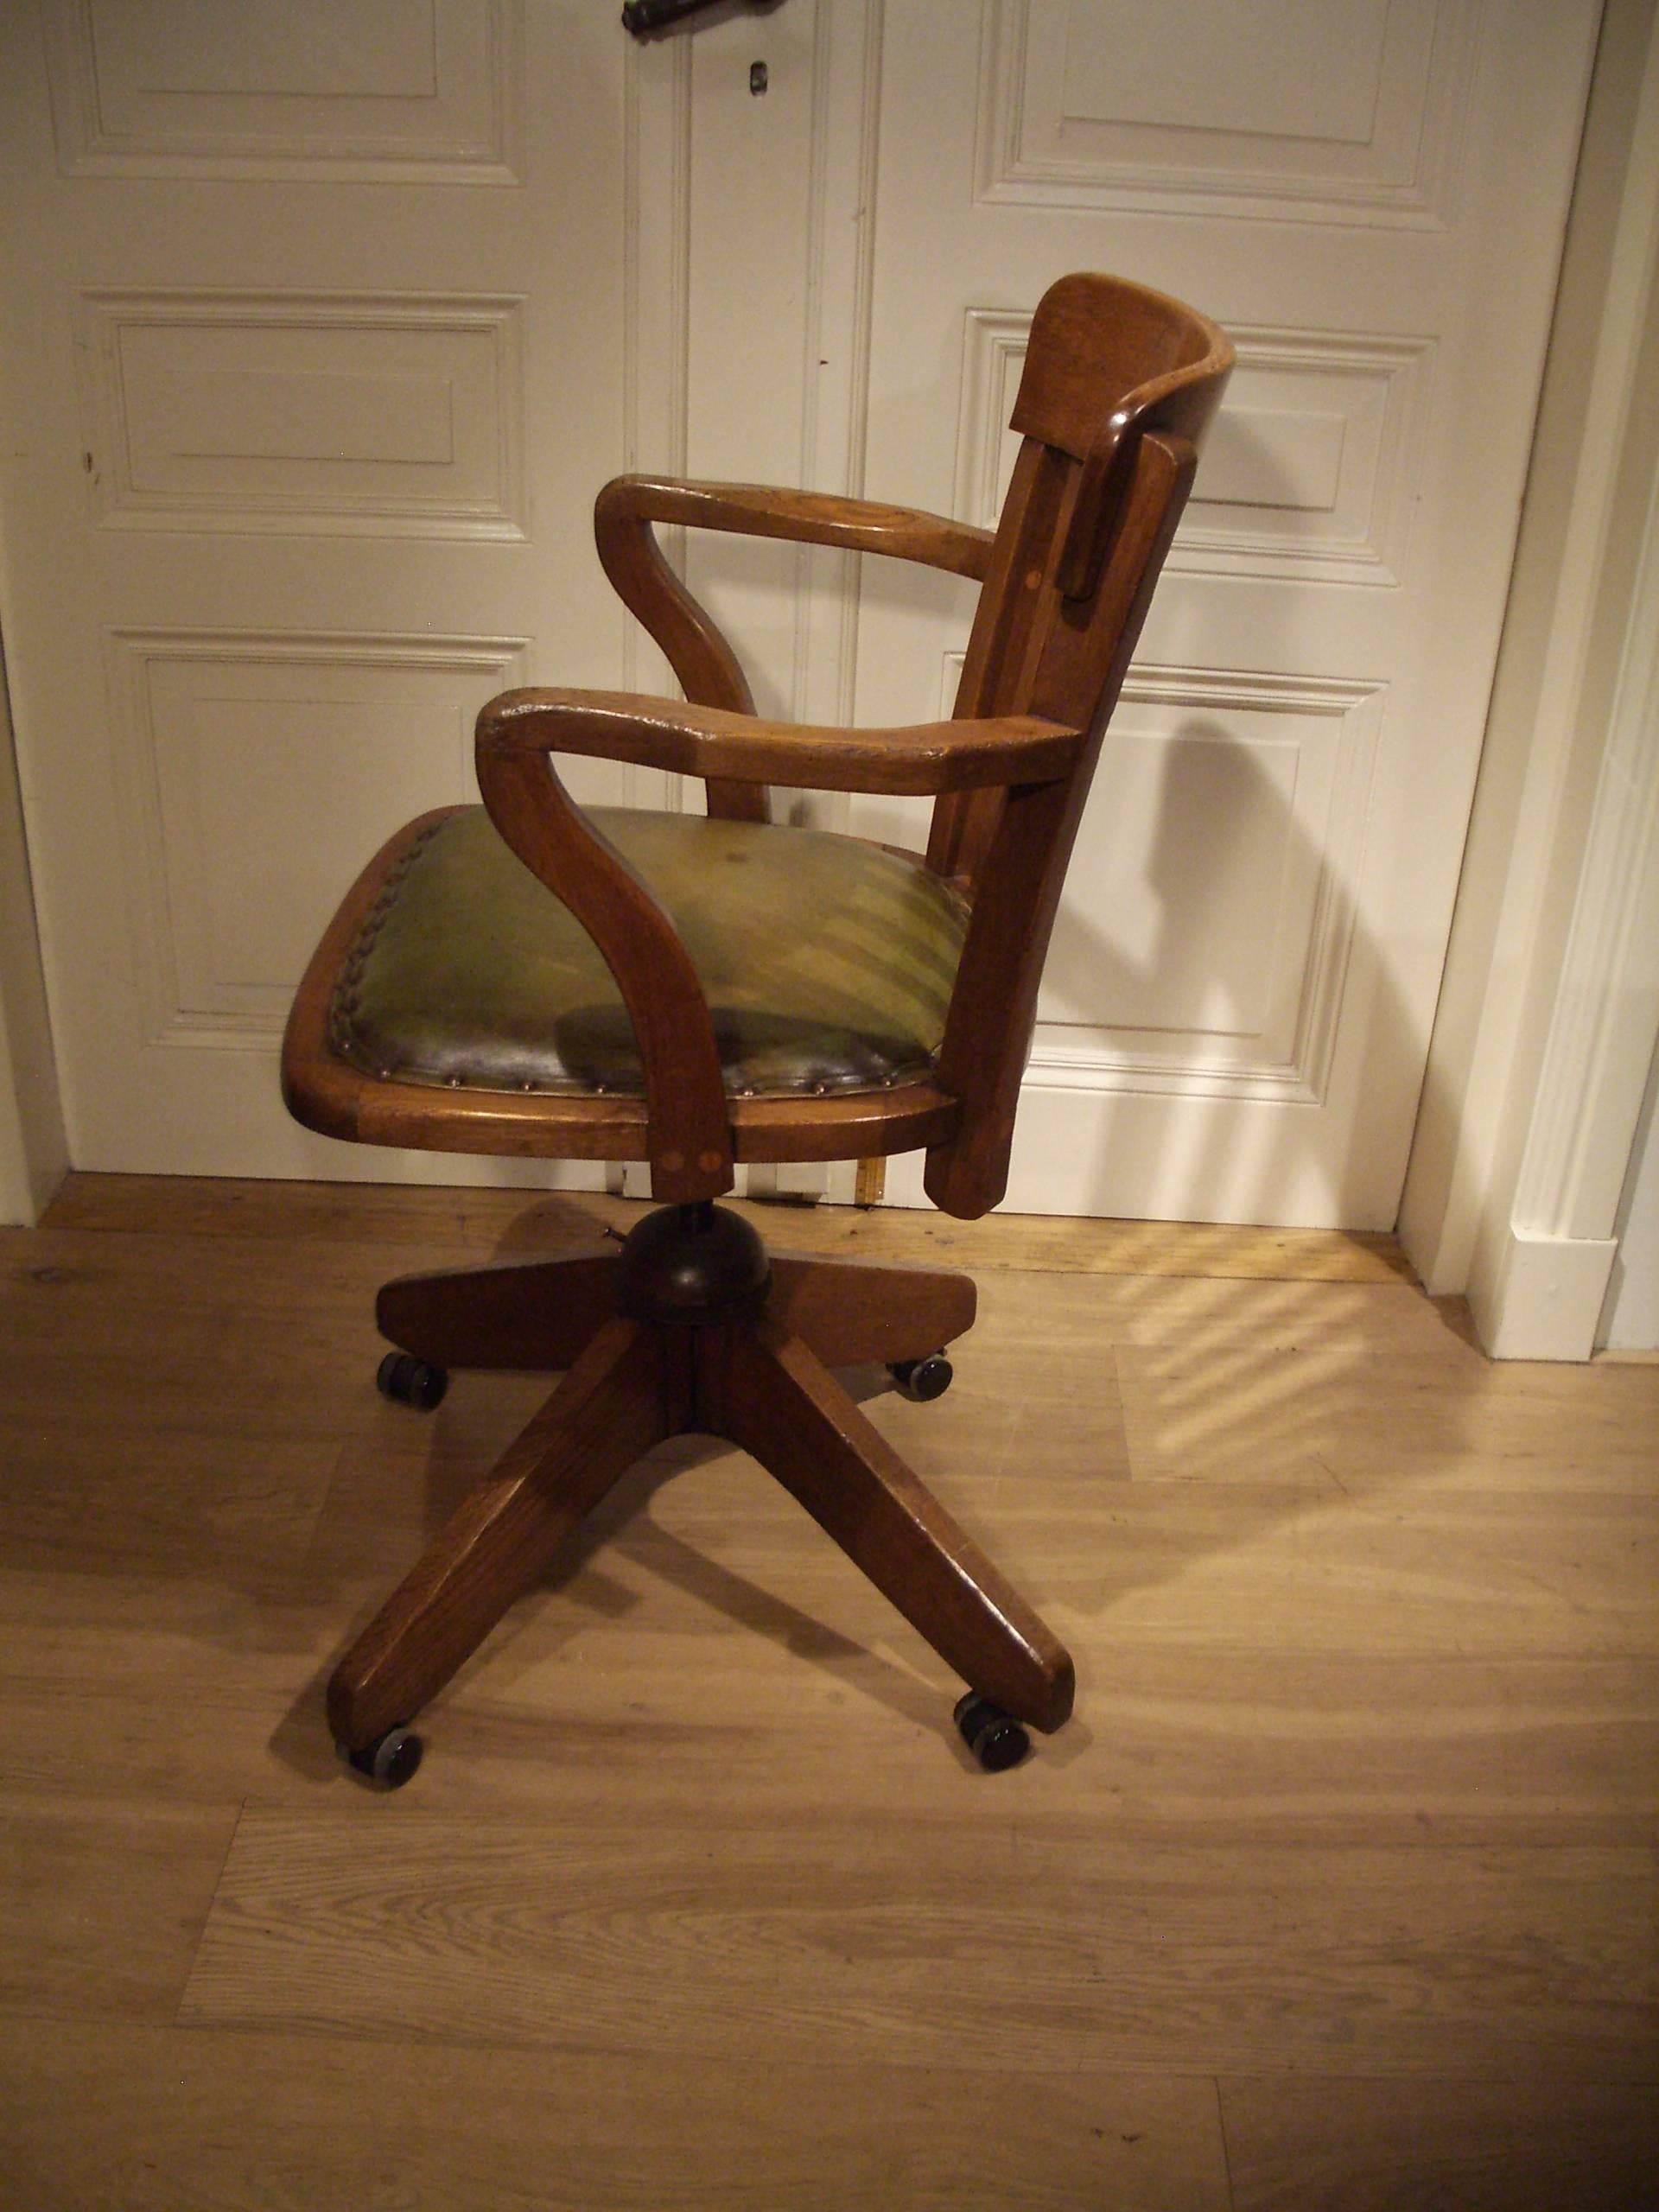 Antique oak office chair in perfect condition. The seat is newly upholstered in green leather. The chair has seat-height adjustment and a rocking mechanism. Equipped with smooth rolling casters, especially for parquet flooring.